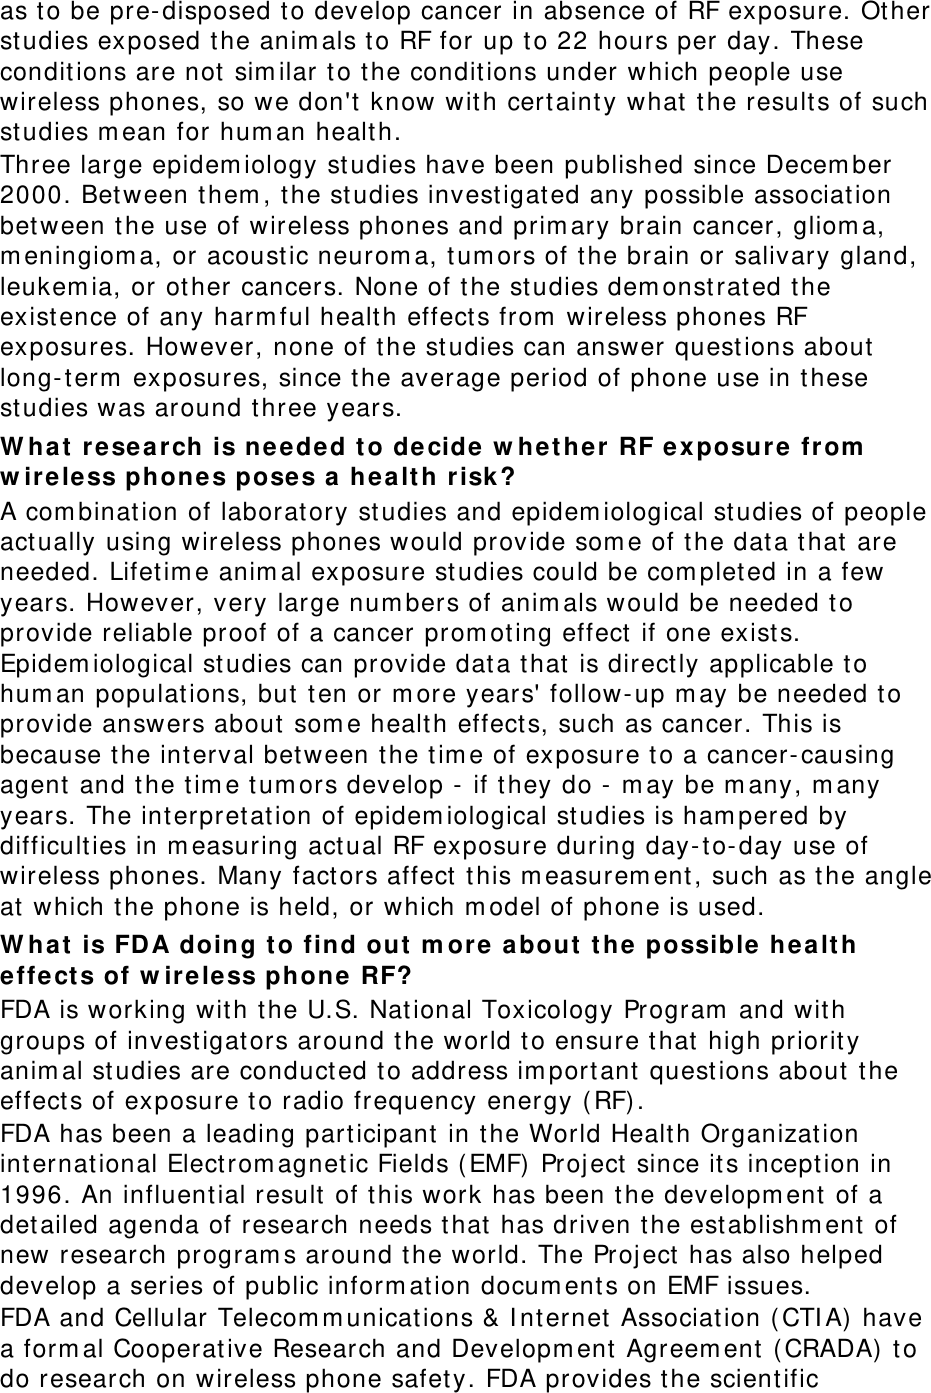 as to be pre-disposed t o develop cancer in absence of RF exposure. Ot her studies exposed the anim als t o RF for up to 22 hours per day. These conditions are not sim ilar t o t he conditions under which people use wireless phones, so we don&apos;t know with cert aint y what the results of such studies m ean for hum an health. Three large epidem iology st udies have been published since Decem ber 2000. Between t hem , the studies invest igat ed any possible associat ion bet ween t he use of wireless phones and prim ary brain cancer, gliom a, m eningiom a, or acoust ic neurom a, t um ors of t he brain or salivary gland, leukem ia, or other cancers. None of t he studies dem onstrat ed t he existence of any harm ful health effect s from  wireless phones RF exposures. However, none of t he st udies can answer quest ions about long- term  exposures, since t he average period of phone use in t hese studies was around three years. W hat resea rch  is neede d to de cide w hether  RF exposure from  w ireless phone s poses a hea lth risk? A com bination of laboratory studies and epidem iological st udies of people act ually using wireless phones would provide som e of t he data t hat are needed. Lifetim e anim al exposure studies could be com plet ed in a few years. However, very large num bers of anim als would be needed to provide reliable proof of a cancer prom ot ing effect  if one exists. Epidem iological st udies can provide data t hat is direct ly applicable t o hum an populat ions, but  ten or m ore years&apos; follow- up m ay be needed t o provide answers about  som e health effect s, such as cancer. This is because the int erval bet ween t he tim e of exposure to a cancer-causing agent and the tim e tum ors develop -  if t hey do -  m ay be m any, m any years. The int erpret ation of epidem iological studies is ham pered by difficulties in m easuring act ual RF exposure during day- t o-day use of wireless phones. Many fact ors affect  t his m easurem ent , such as t he angle at  which t he phone is held, or which m odel of phone is used. W hat is FDA doing to find out  m ore a bout the possible  healt h effect s of w irele ss phone  RF? FDA is working with t he U.S. Nat ional Toxicology Program  and with groups of invest igat ors around the world t o ensure t hat high priorit y anim al studies are conduct ed t o address im port ant questions about  t he effect s of exposure to radio frequency energy ( RF). FDA has been a leading participant  in the World Health Organization internat ional Elect rom agnet ic Fields ( EMF) Project since its inception in 1996. An influential result of t his work has been the developm ent of a det ailed agenda of research needs that  has driven the est ablishm ent  of new research program s around t he world. The Project has also helped develop a series of public inform at ion docum ent s on EMF issues. FDA and Cellular Telecom m unications &amp; I nt ernet Association ( CTI A)  have a form al Cooperative Research and Developm ent  Agreem ent  ( CRADA)  t o do research on wireless phone safet y. FDA provides t he scientific 